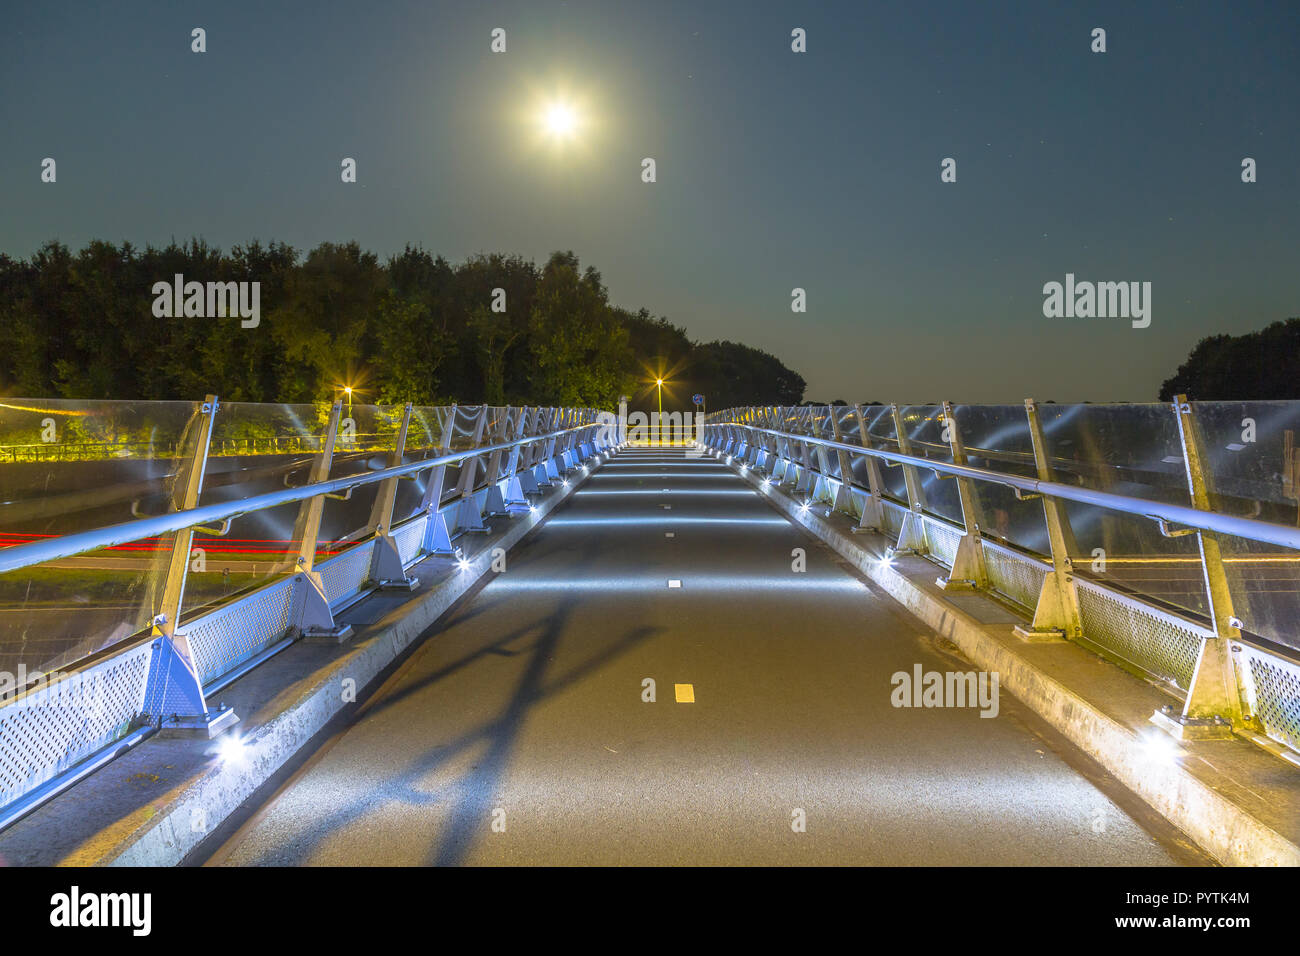 Cycling bridge with low level illumination to prevent disturbing of  migration route of nocturnal wildlife like bats and owls Stock Photo